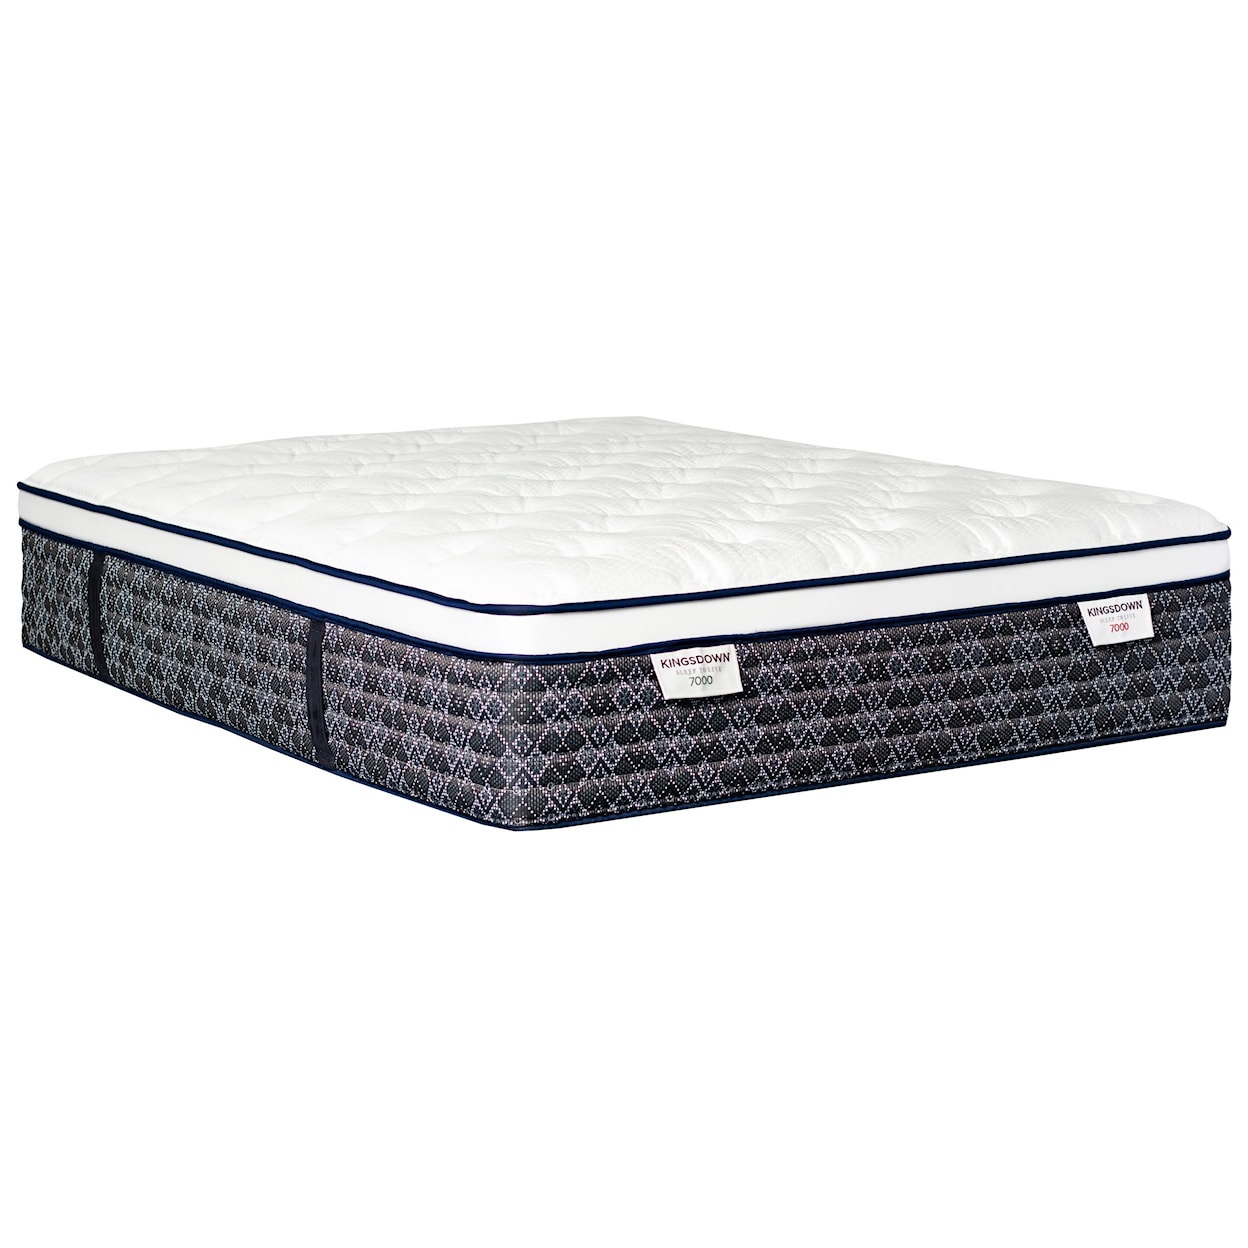 Kingsdown Sleep to Live 9000 Gold Blue ET Twin Pocketed Coil Mattress